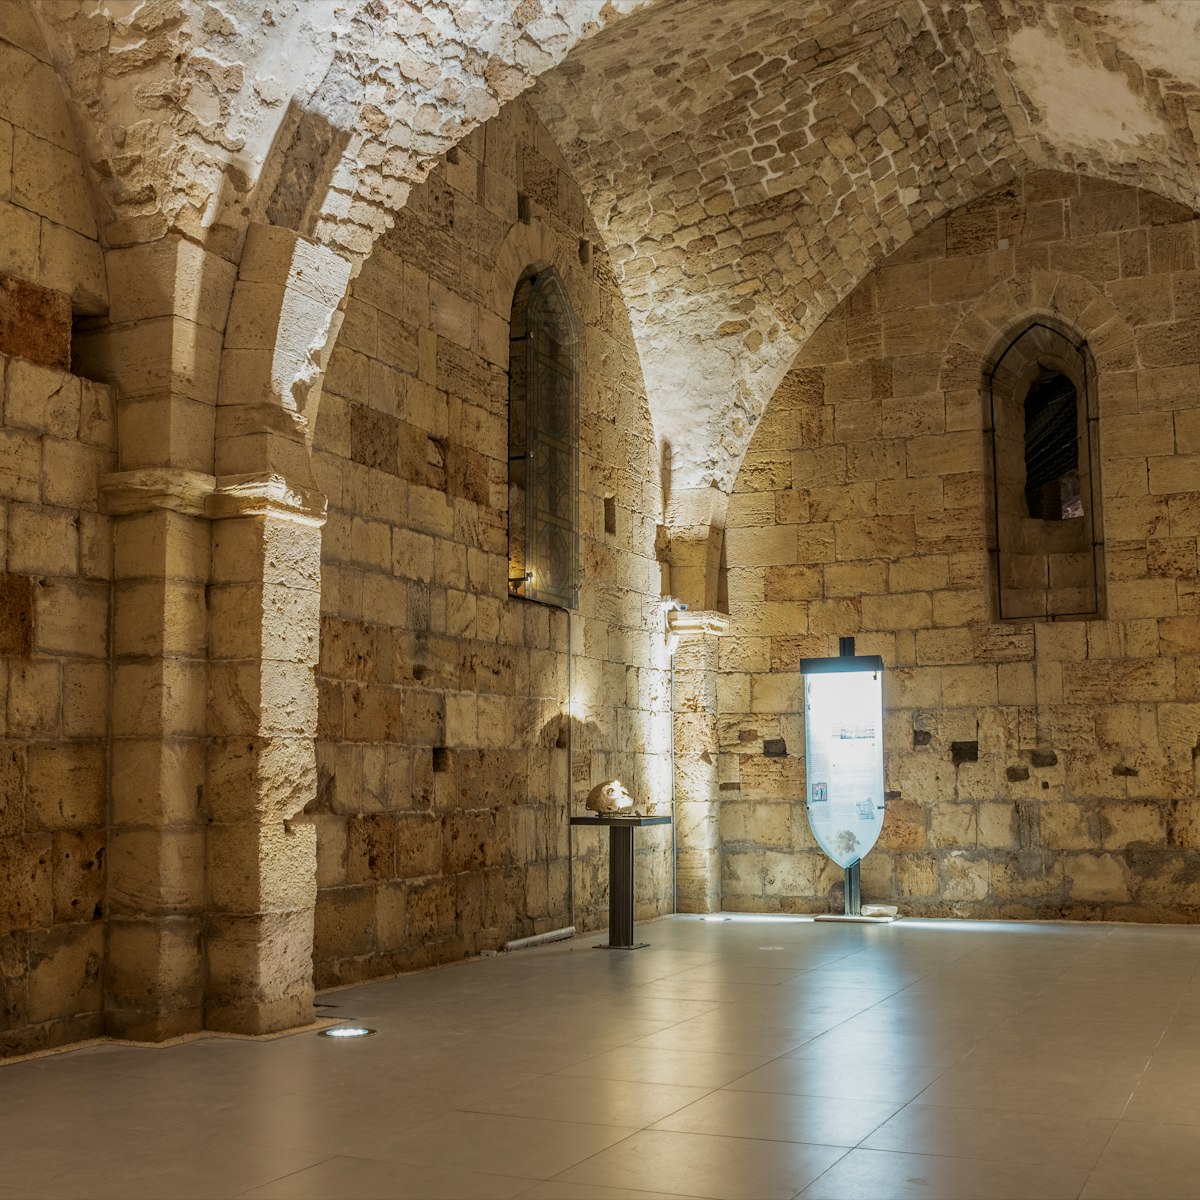 Сomplex of underground halls, which was built and used by the Knights Hospitaller, Acre, Israel.